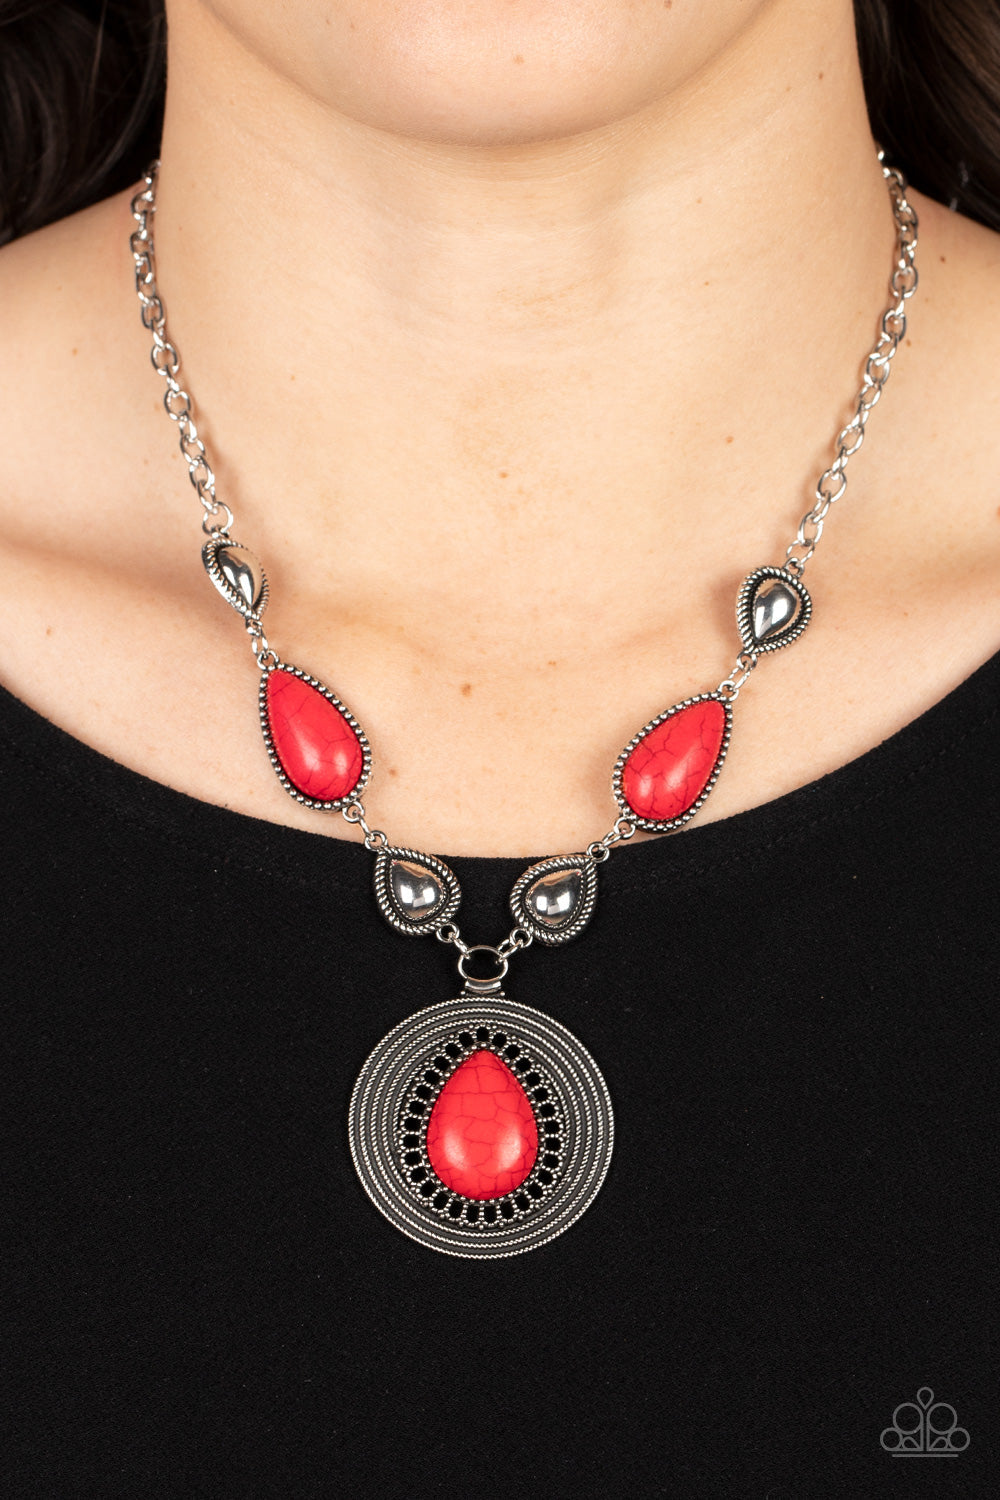 Saguaro Soul Trek - Red Stone and Silver Necklace - Paparazzi Accessories - Shiny silver teardrops alternate with red stone frames at the bottom of a silver chain. Bordered in whirls of studded details, an oversized red teardrop stone is pressed into the center of the rippling silver pendant for a hypnotic finish. Features an adjustable clasp closure. 